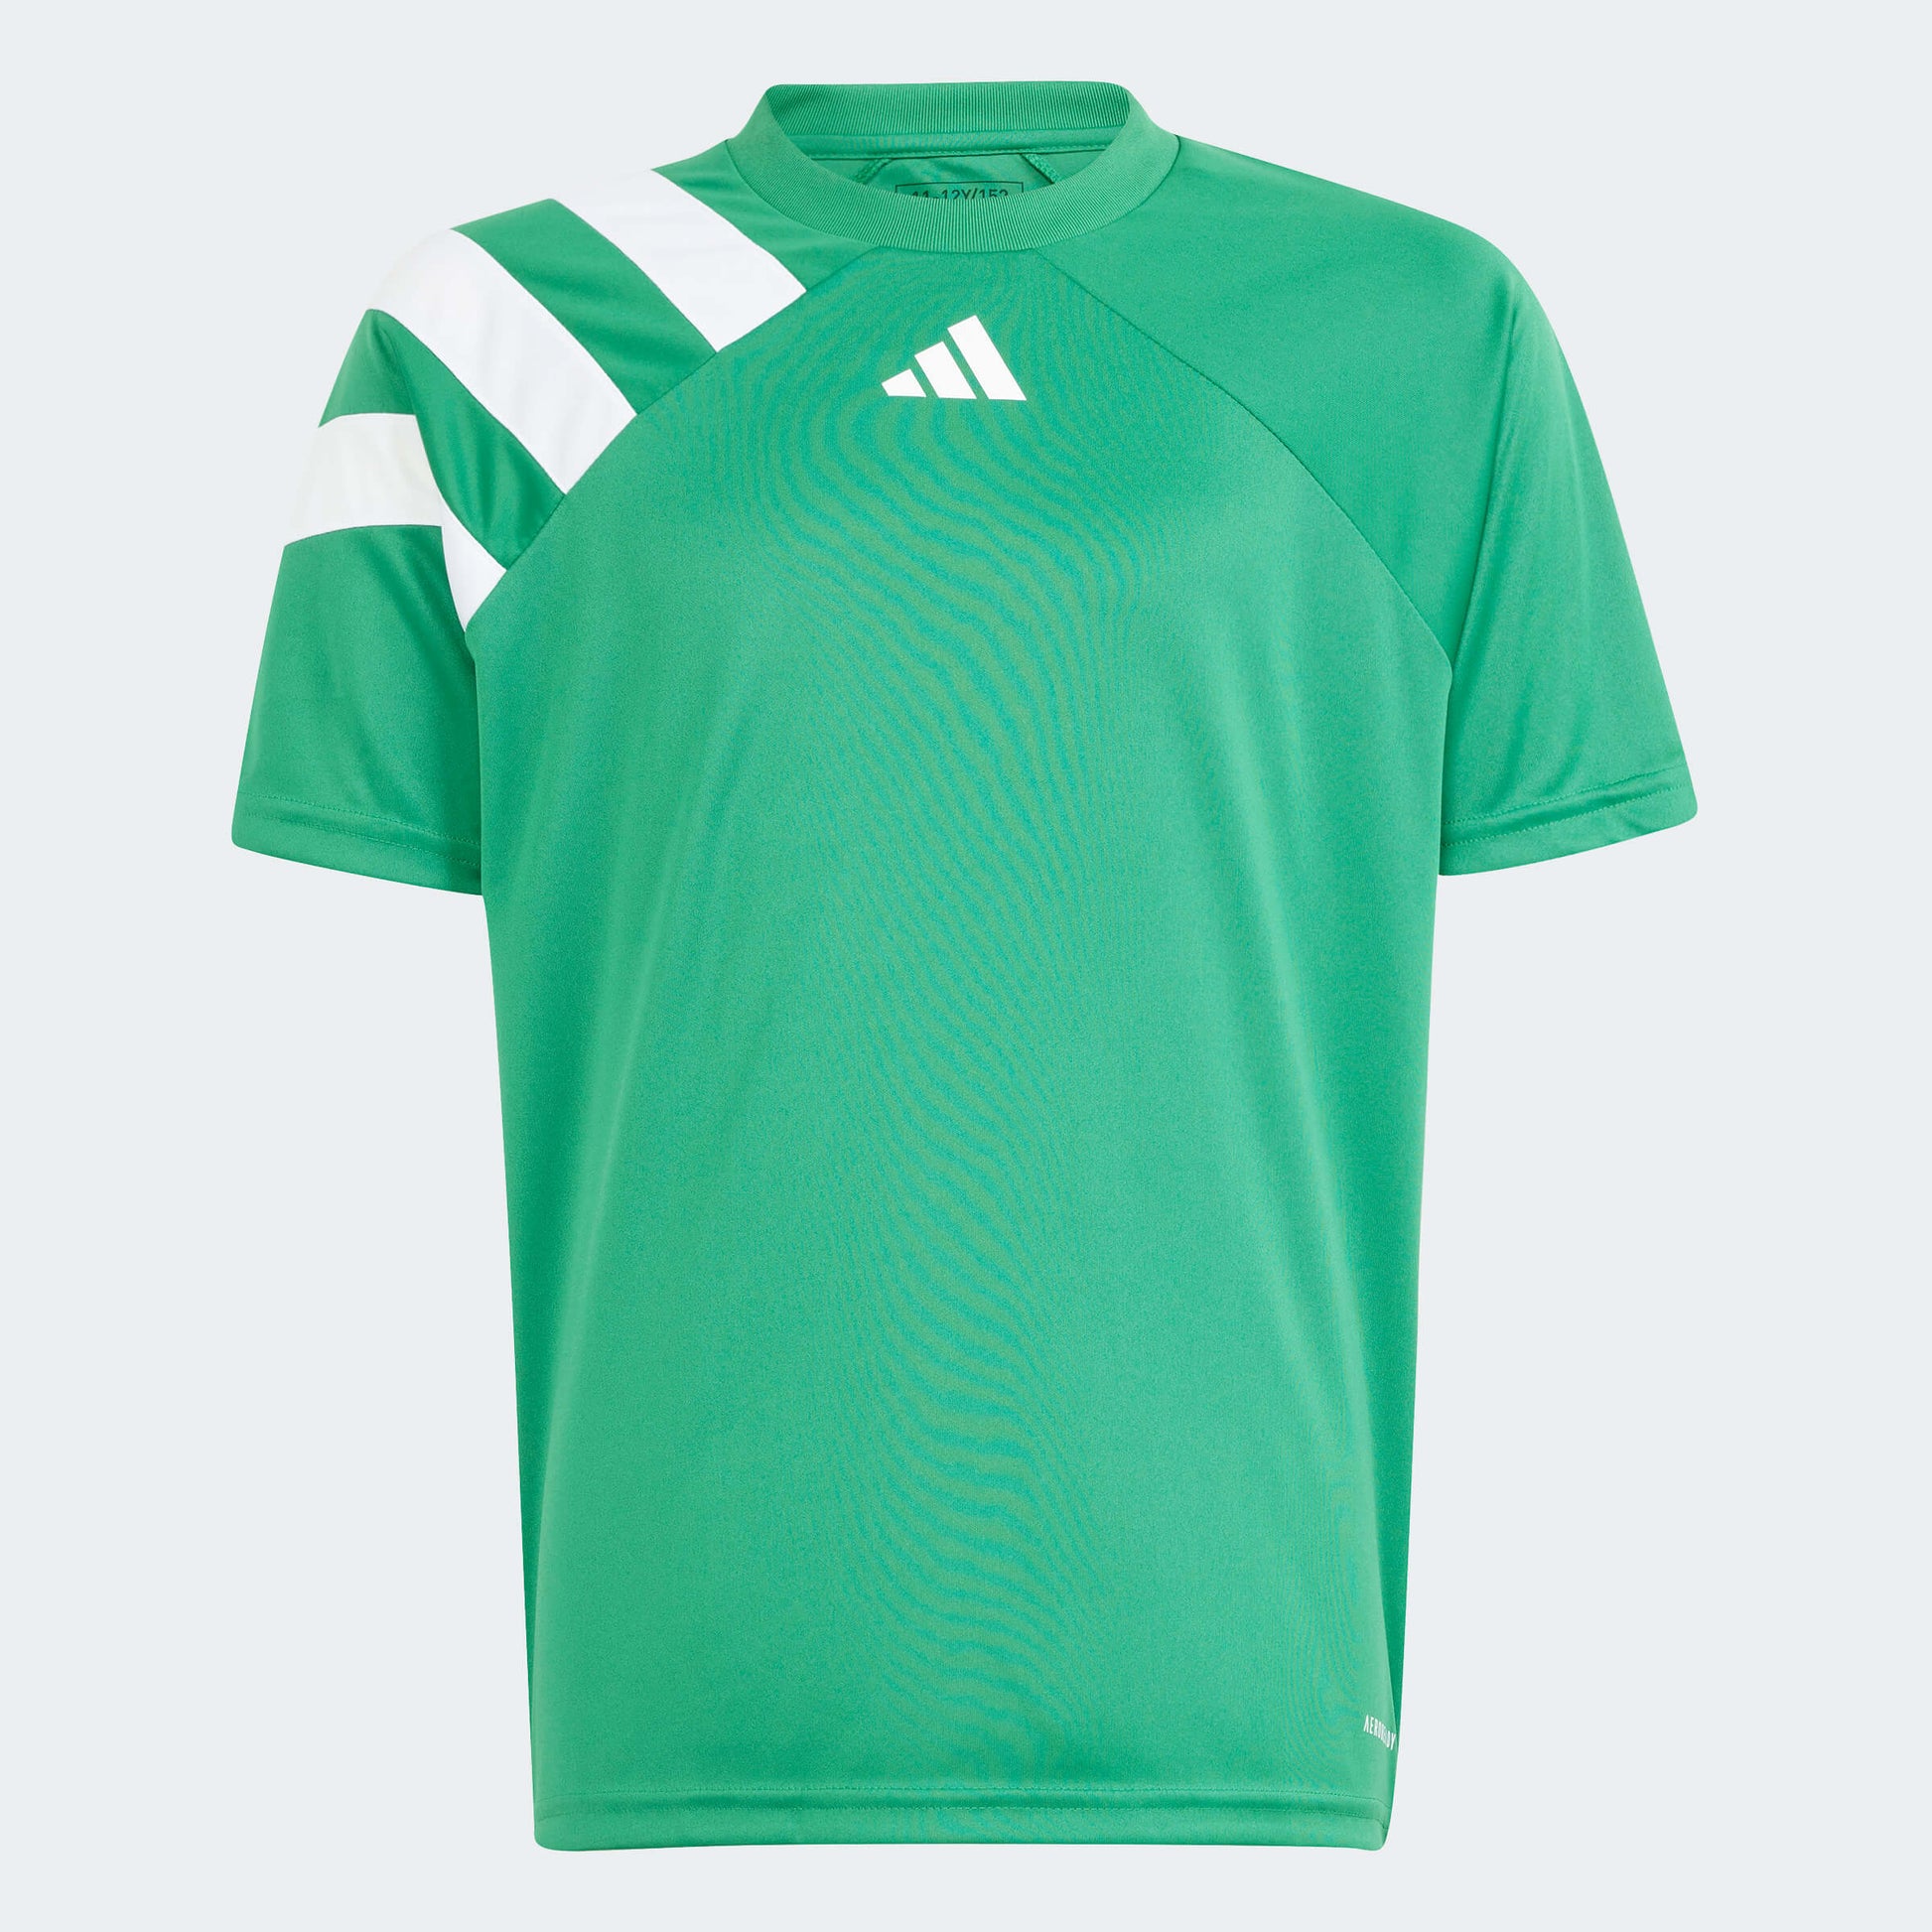 adidas YOUTH Fortore 23 Jersey Team Green-White (Front)